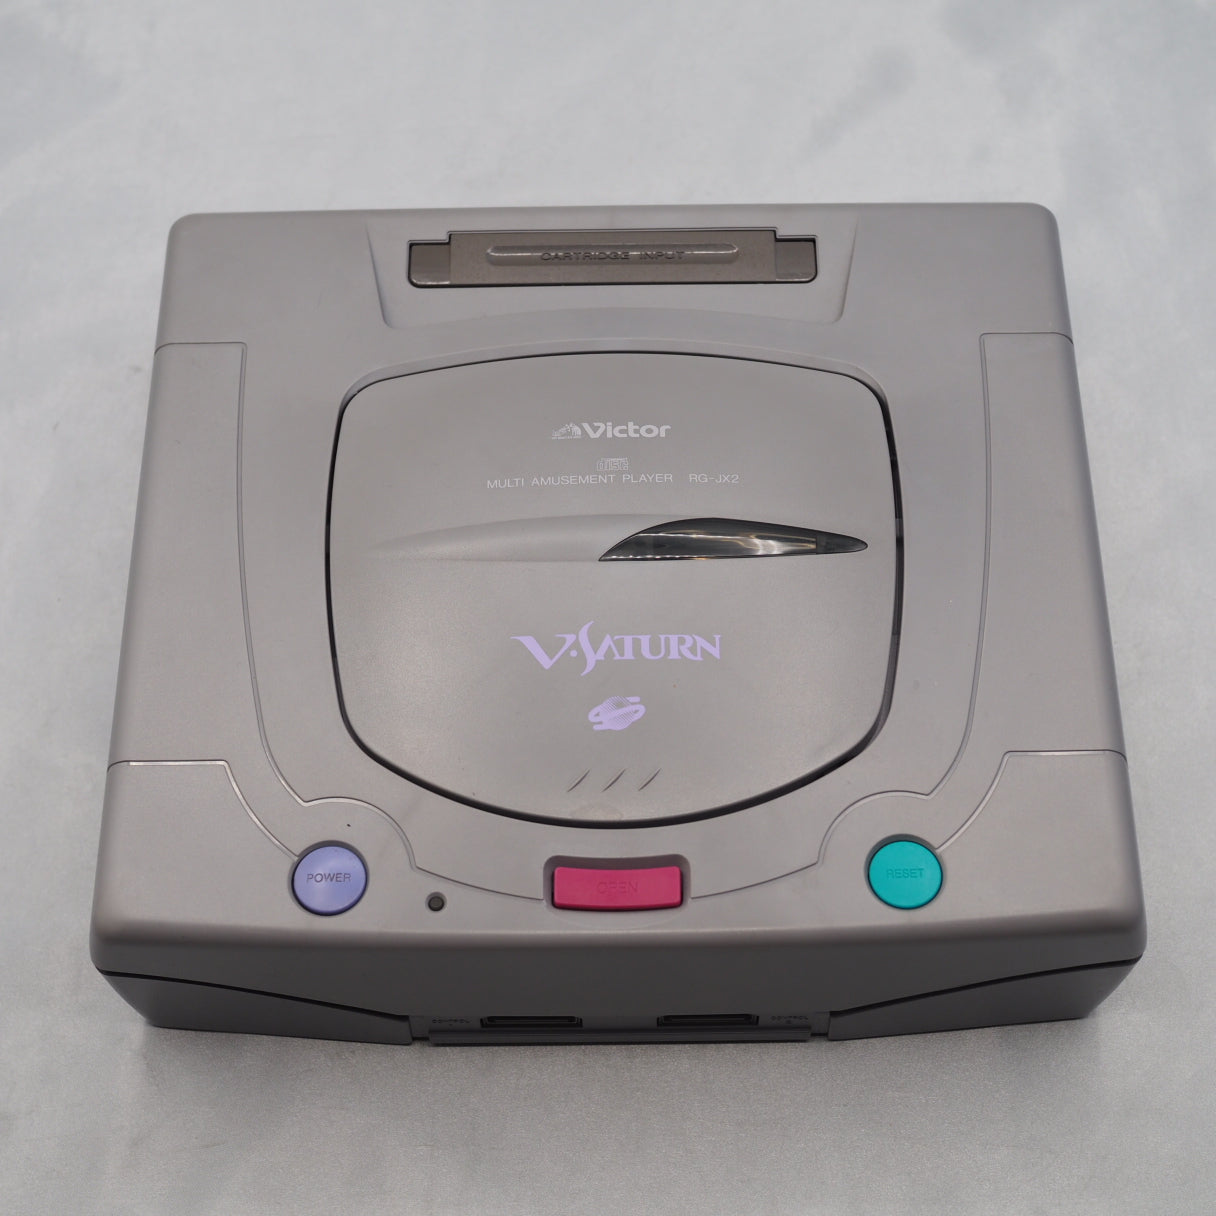 VICTOR V SATURN Console RG-JX2 Boxed [Serial number match]